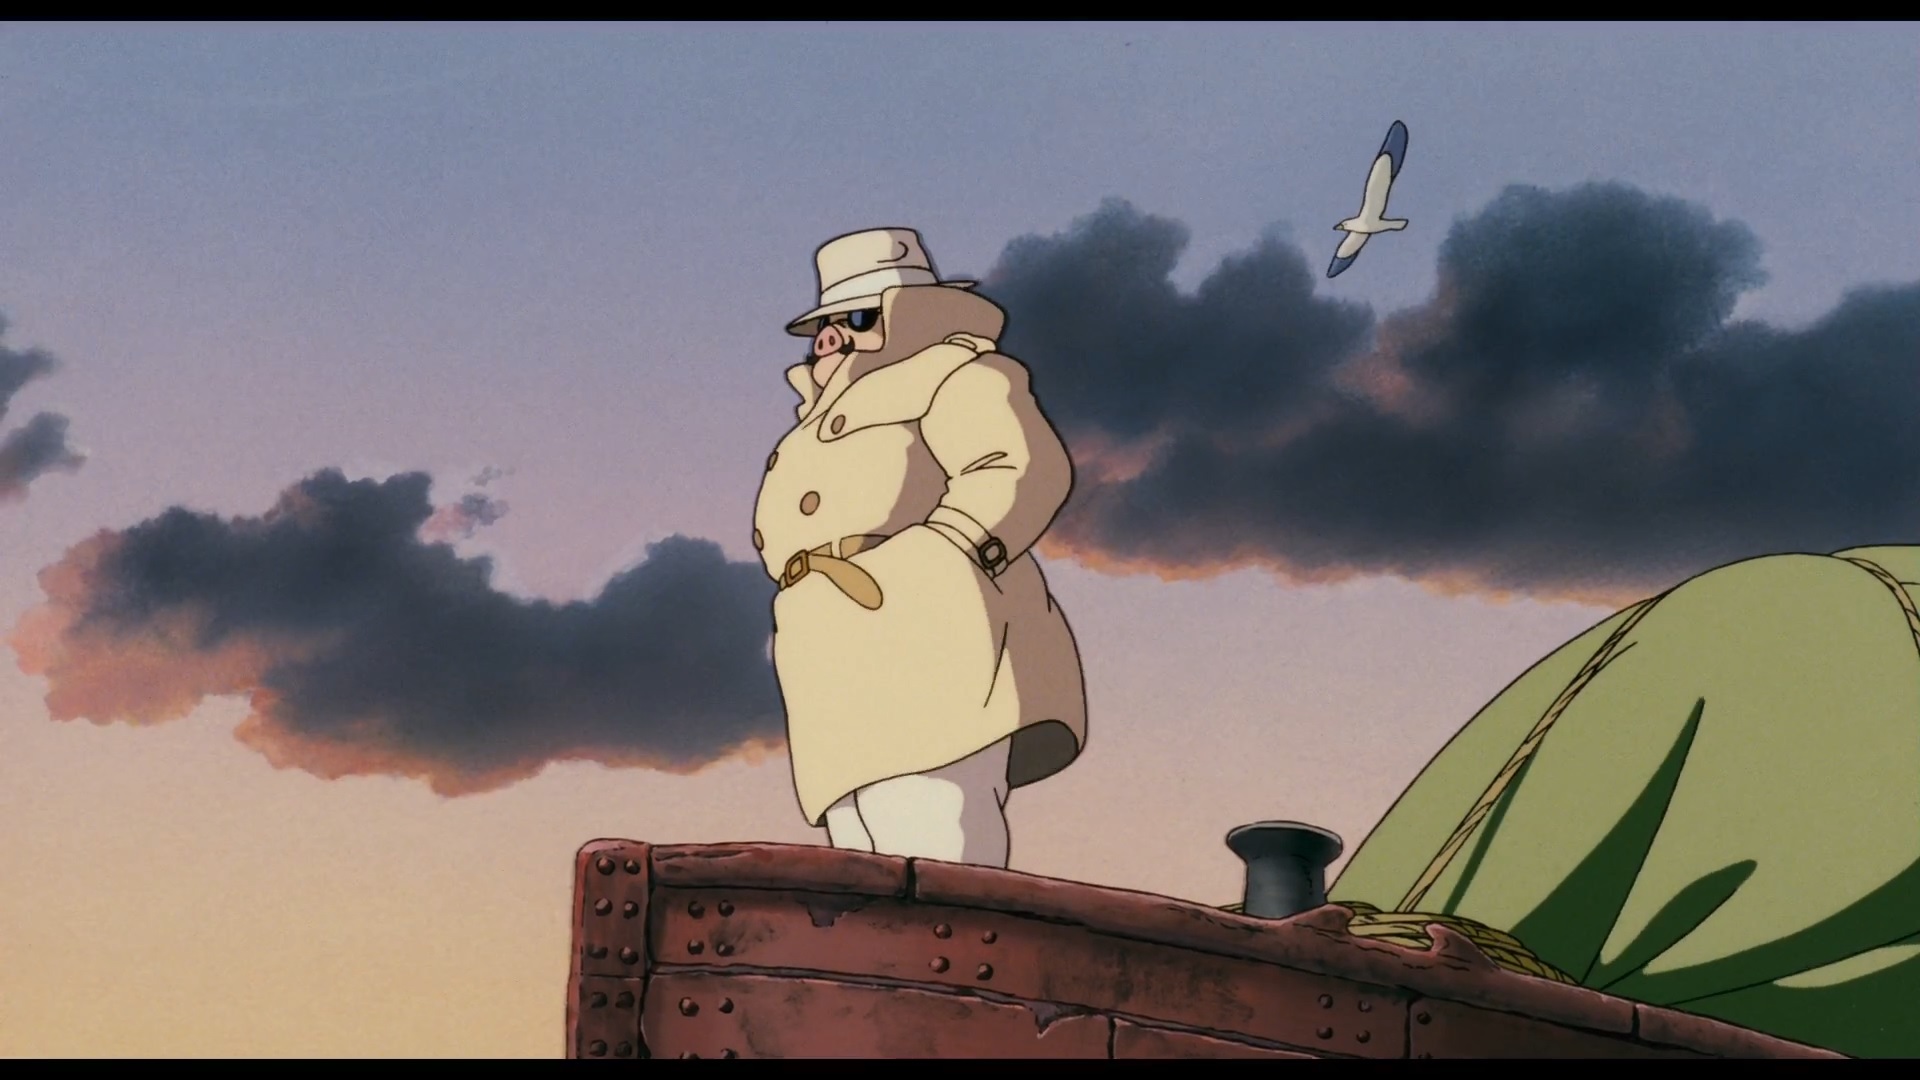 Good Ol’ Review: The Romantic High-Flying Adventure of Miyazaki’s “Porco Rosso”